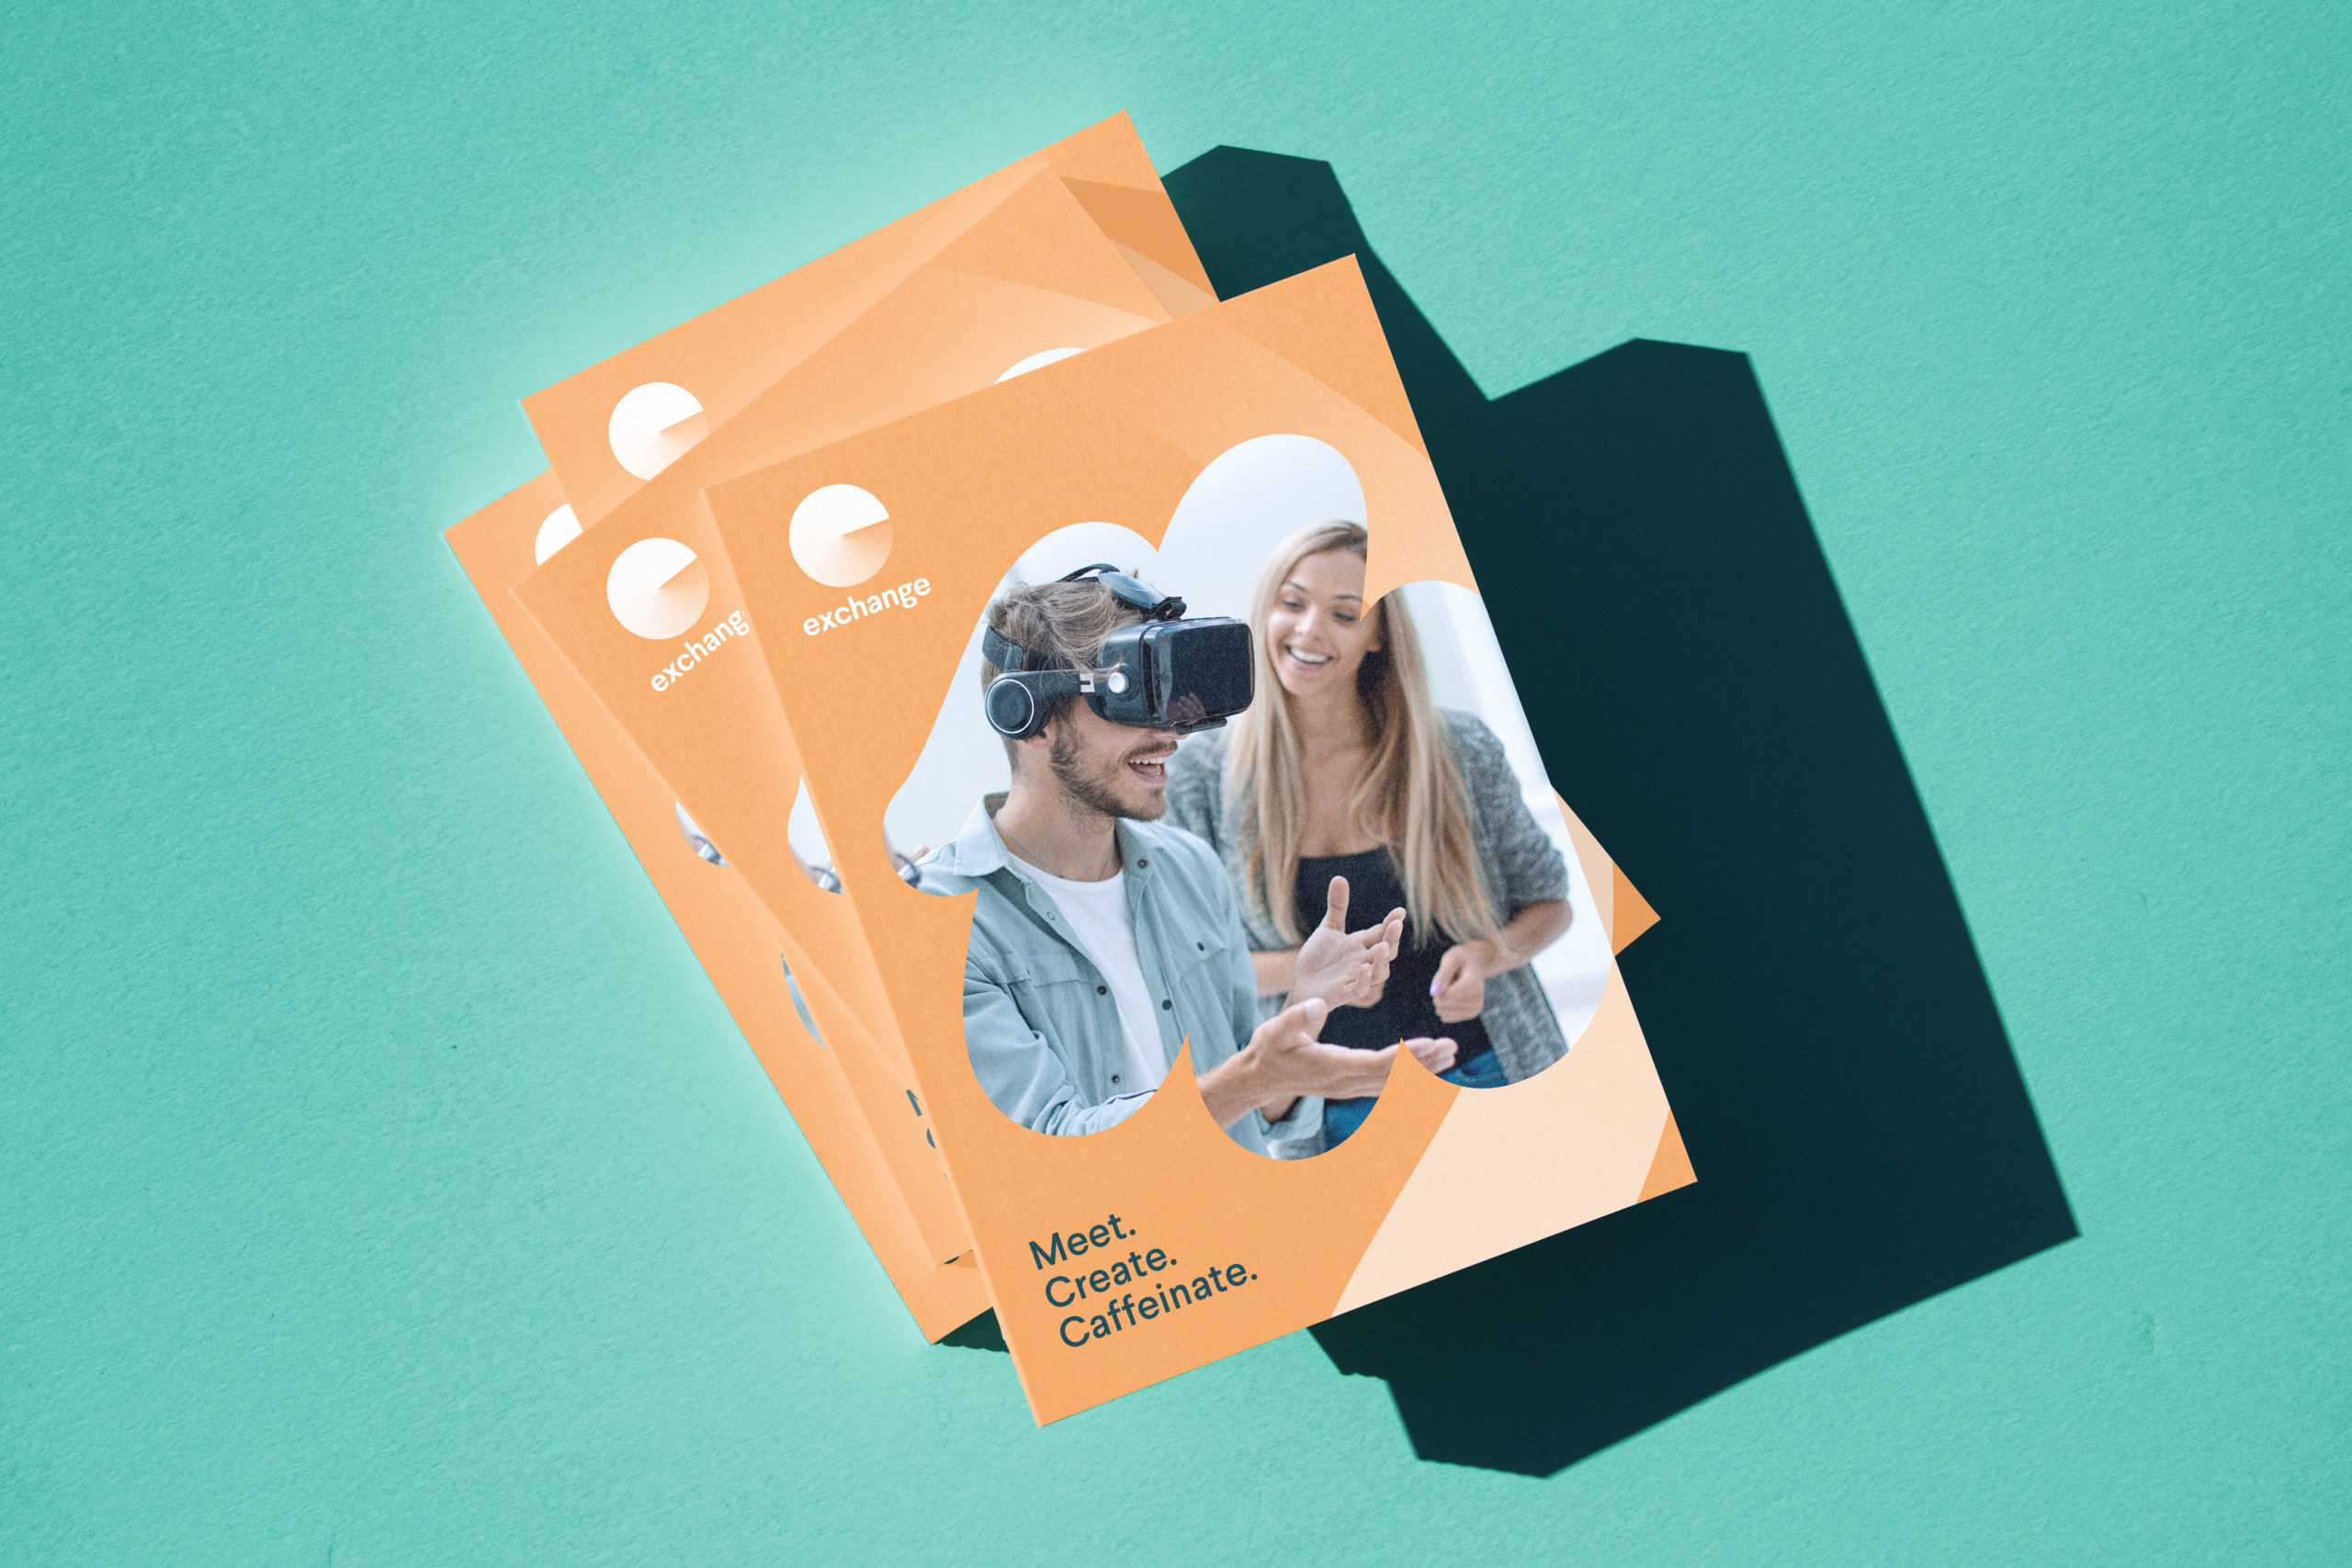 The Exchange publication cover, showing a guy with goggles on, interacting in the Metaverse.